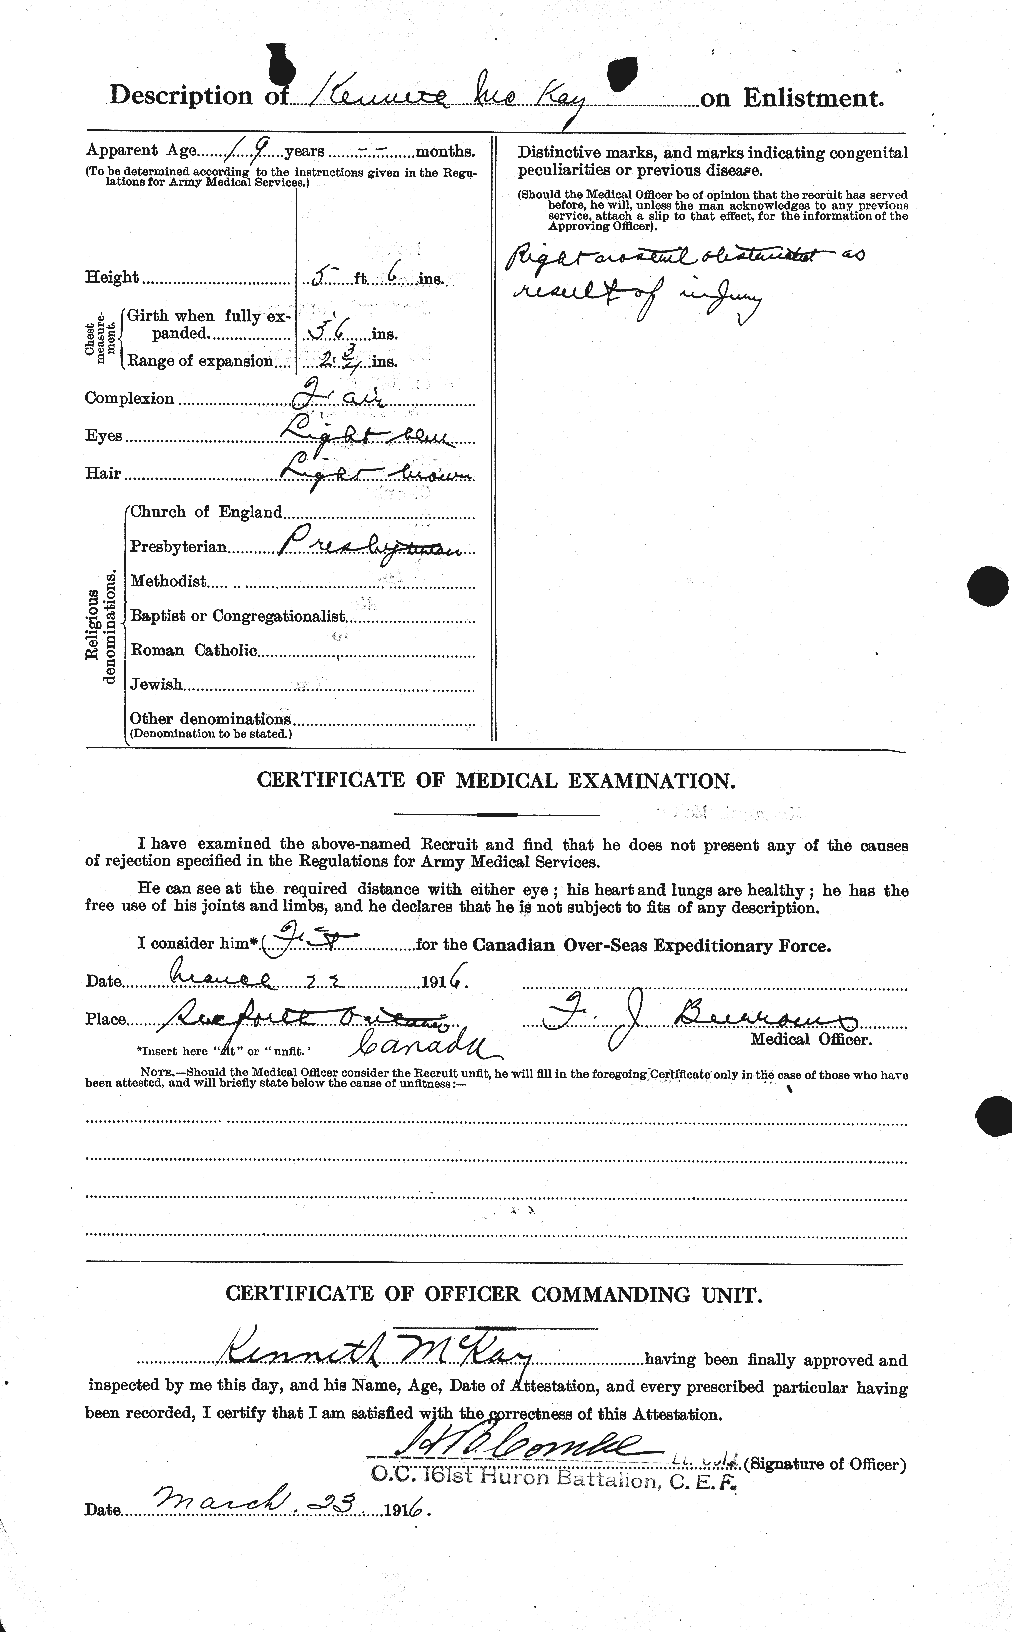 Personnel Records of the First World War - CEF 527126b